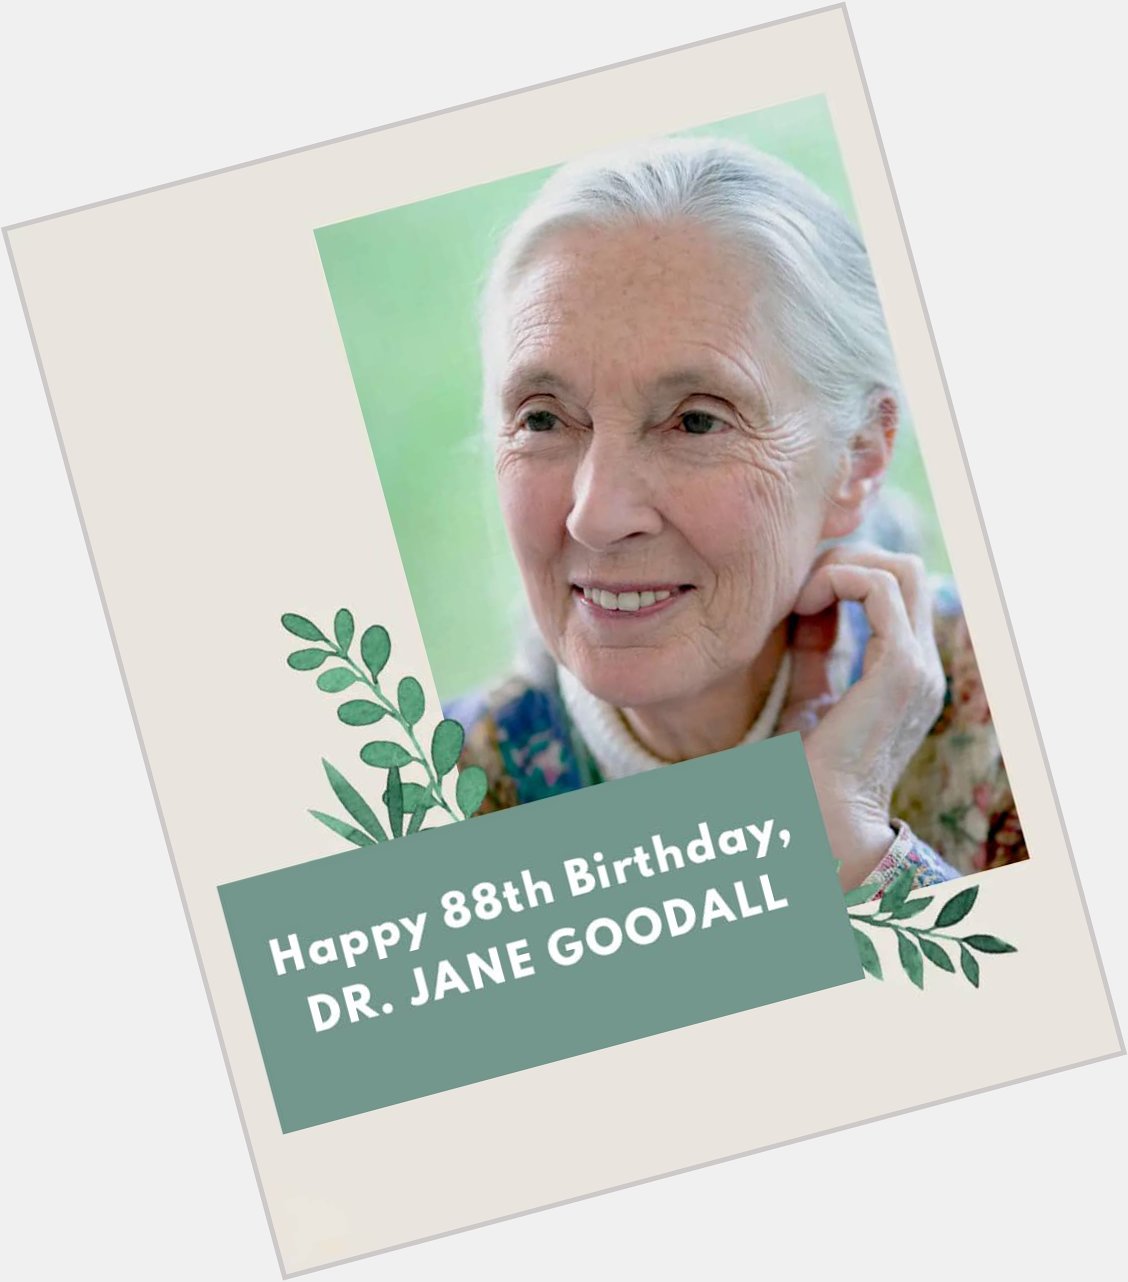 Happy Birthday Dr. Jane Goodall. The world is a better place with you. Long life to you!!!
I love you    